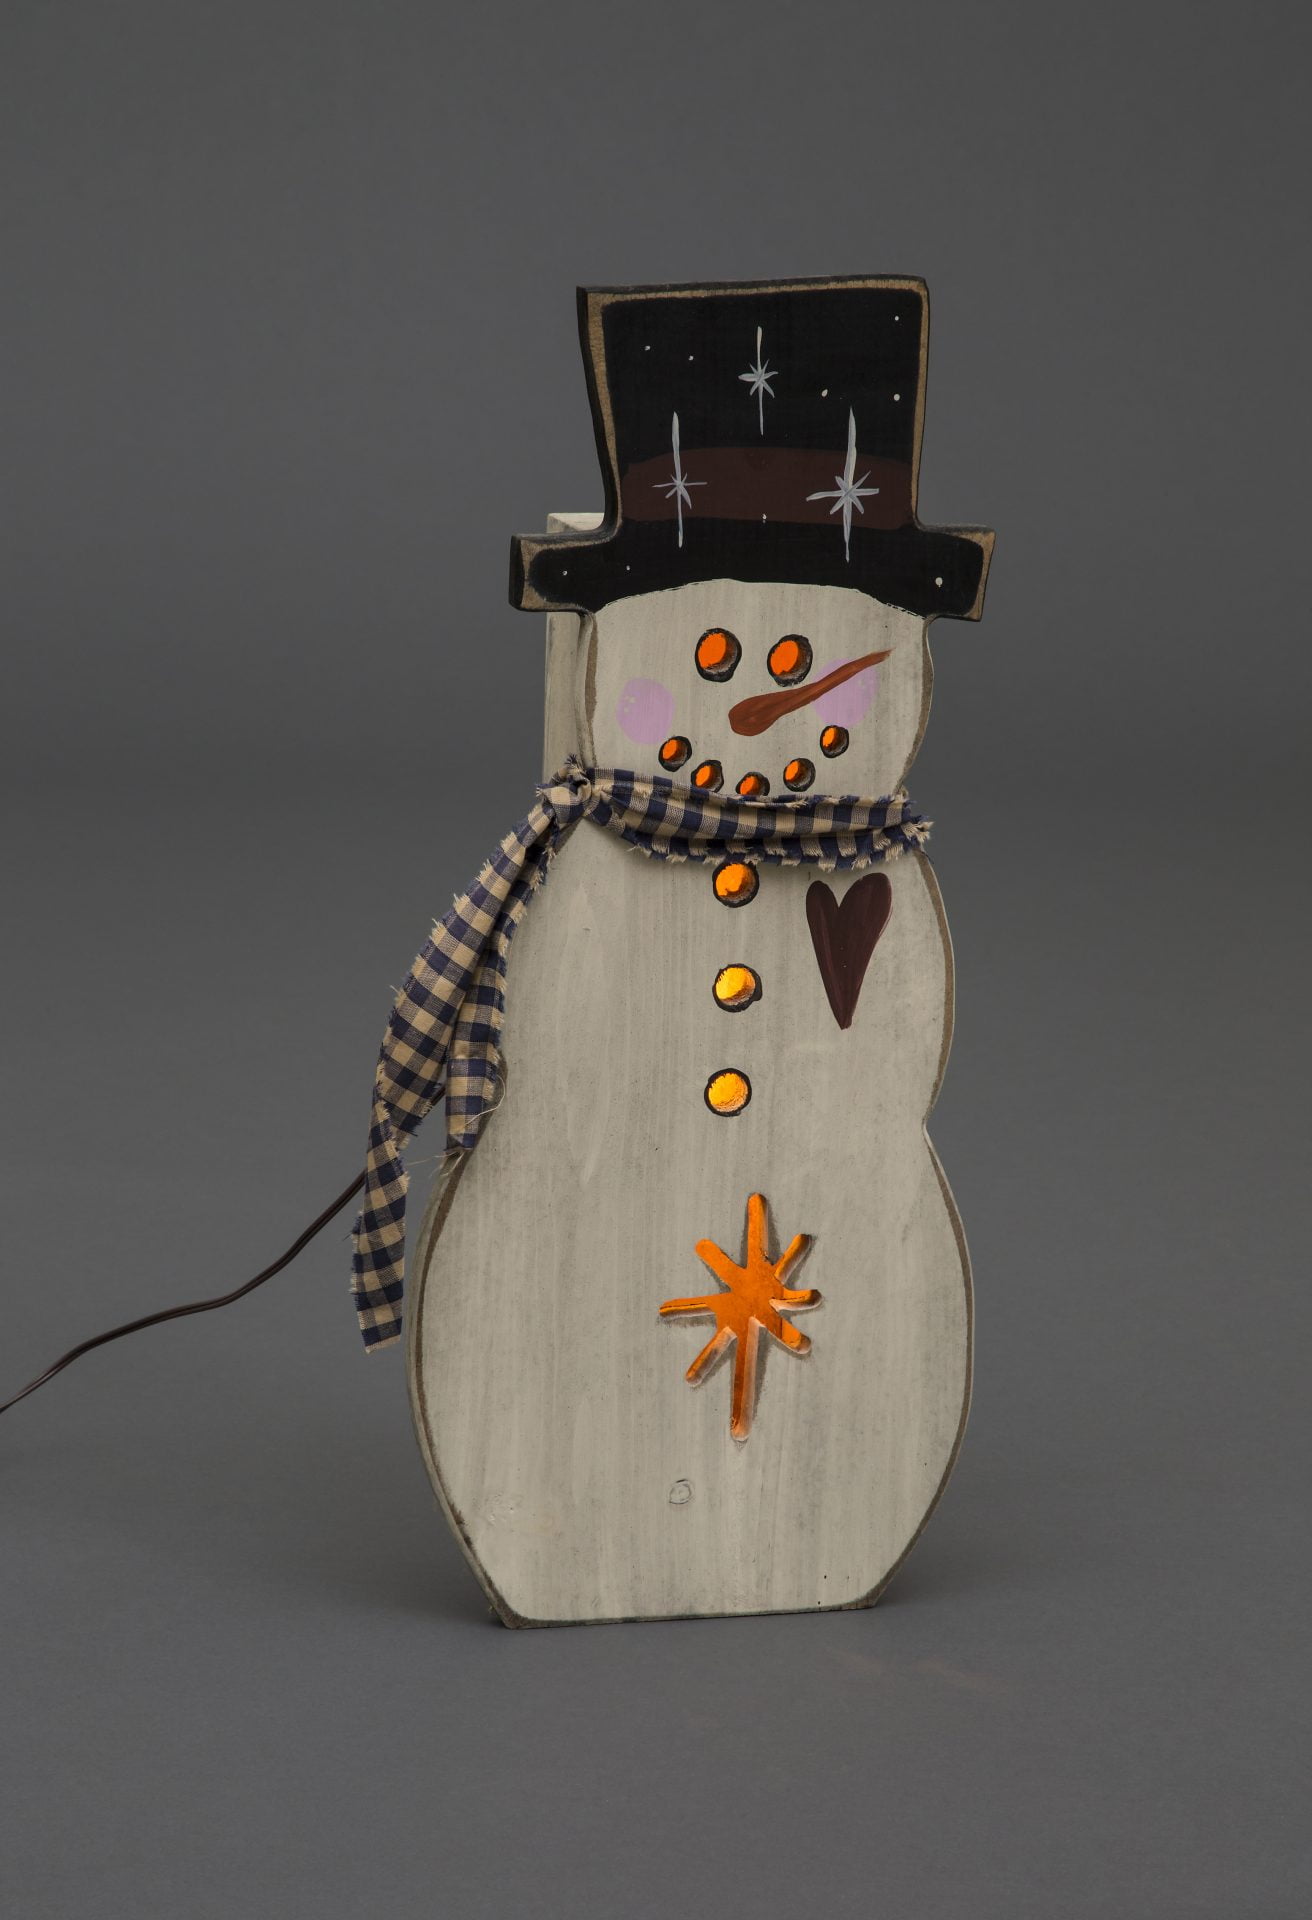 Primitive Rustic Christmas Decoration – Wooden Luminary “Lil’ Brother” Snowman